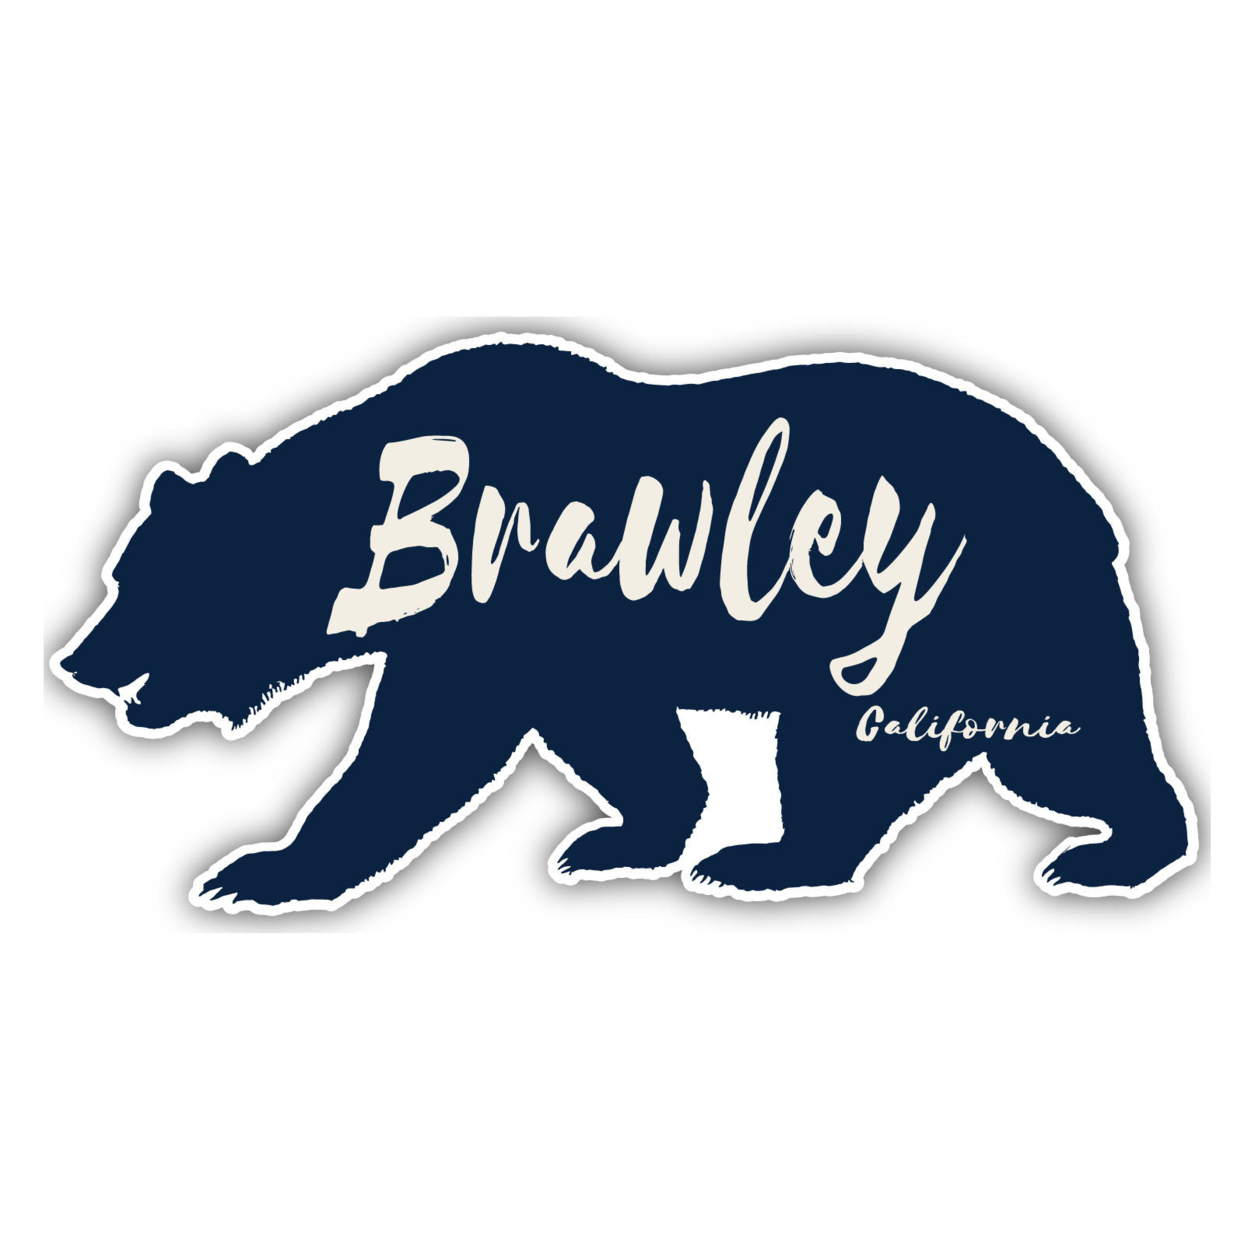 Brawley California Souvenir Decorative Stickers (Choose Theme And Size) - 4-Pack, 4-Inch, Bear